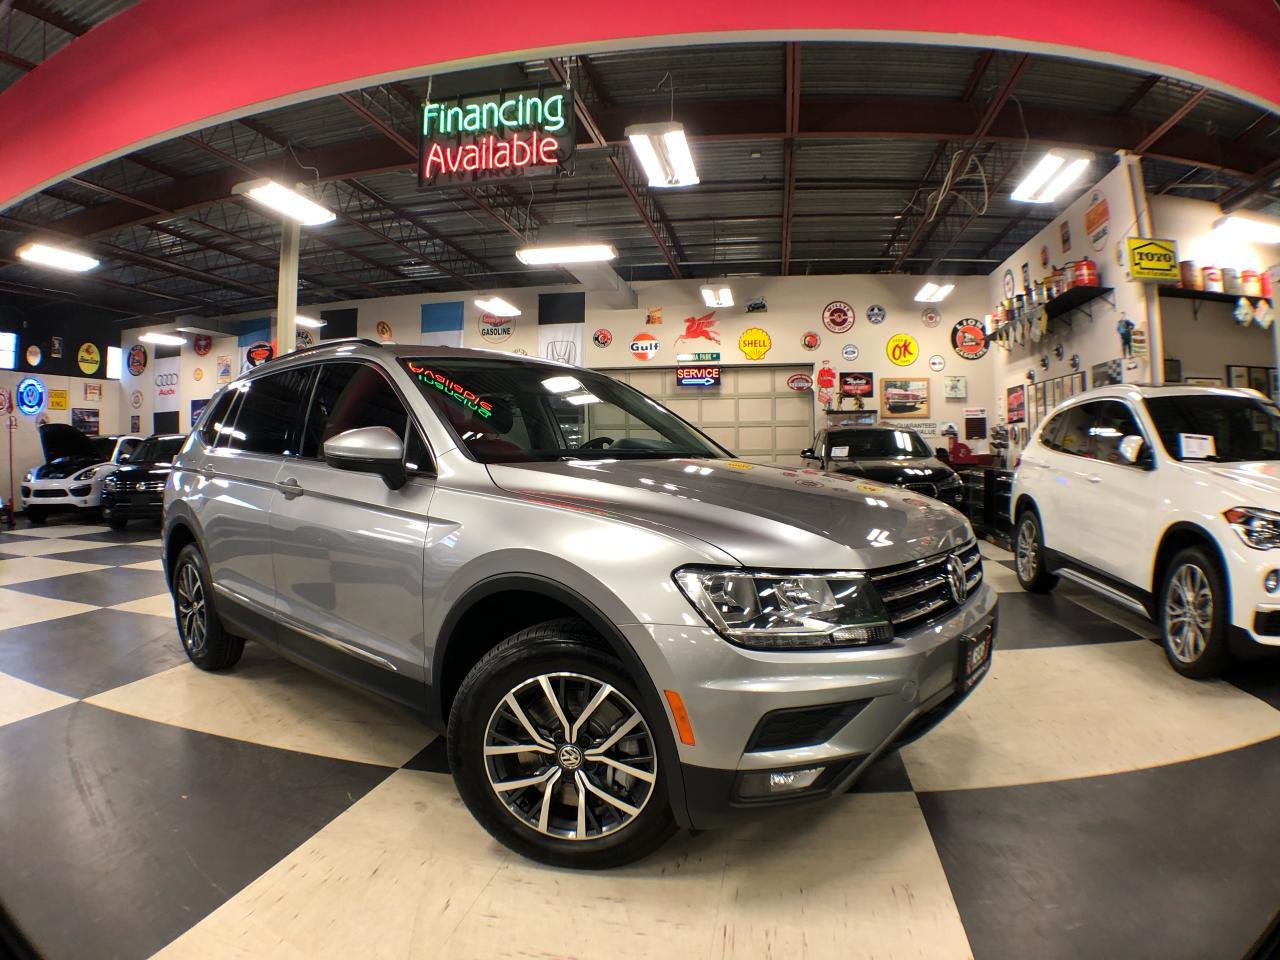 2020 Volkswagen Tiguan COMFORTLINE AWD LEATHER PANO/ROOF A/CARPLAY B/SP0T